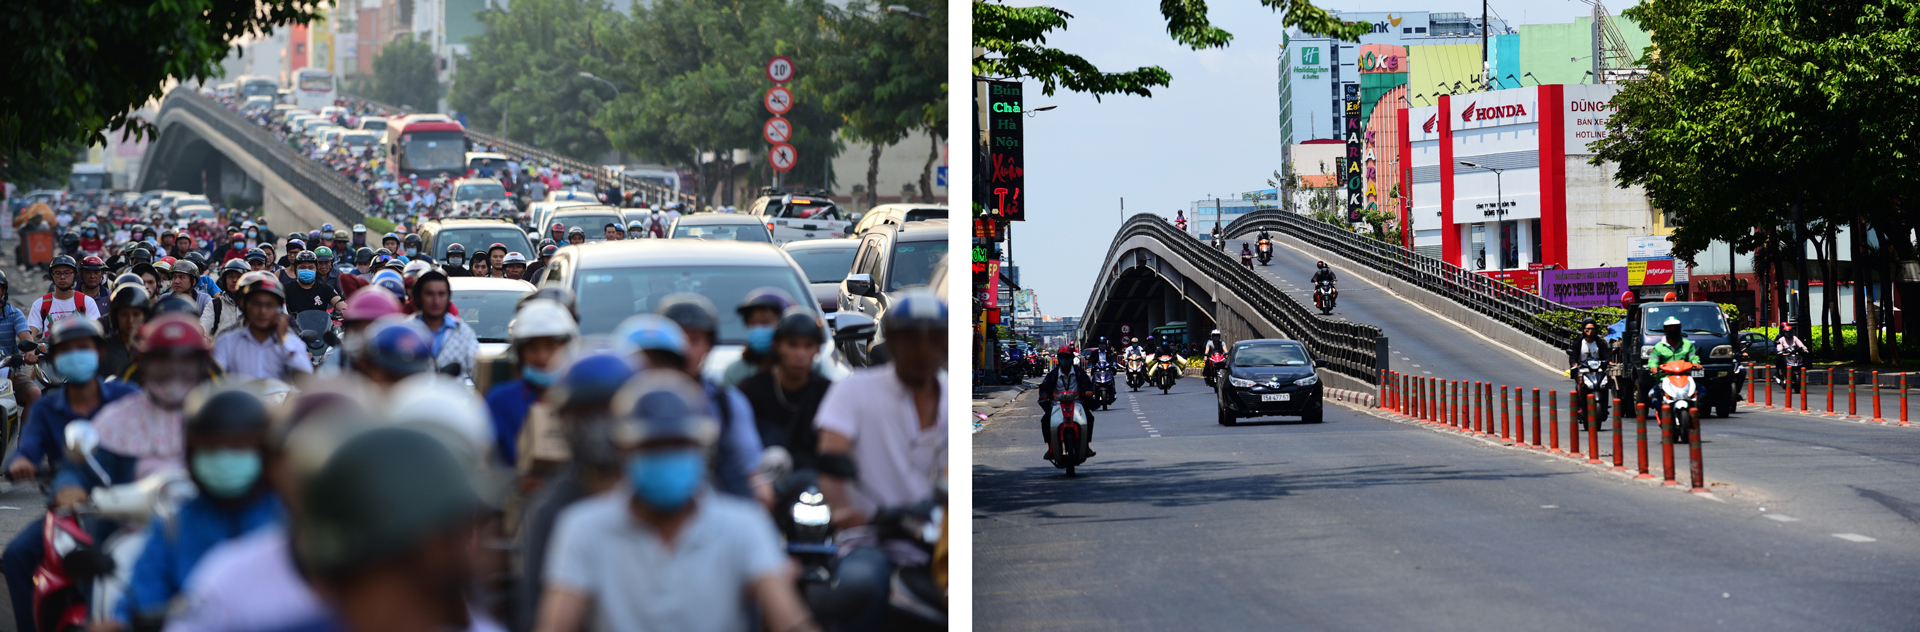 Traffic congestion (left) that was common at the Lang Cha Ca Intersection in Tan Binh District, Ho Chi Minh City, Vietnam is no longer an issue during the COVID-19 epidemic (right). Photos: Truc Phuong / Tuoi Tre